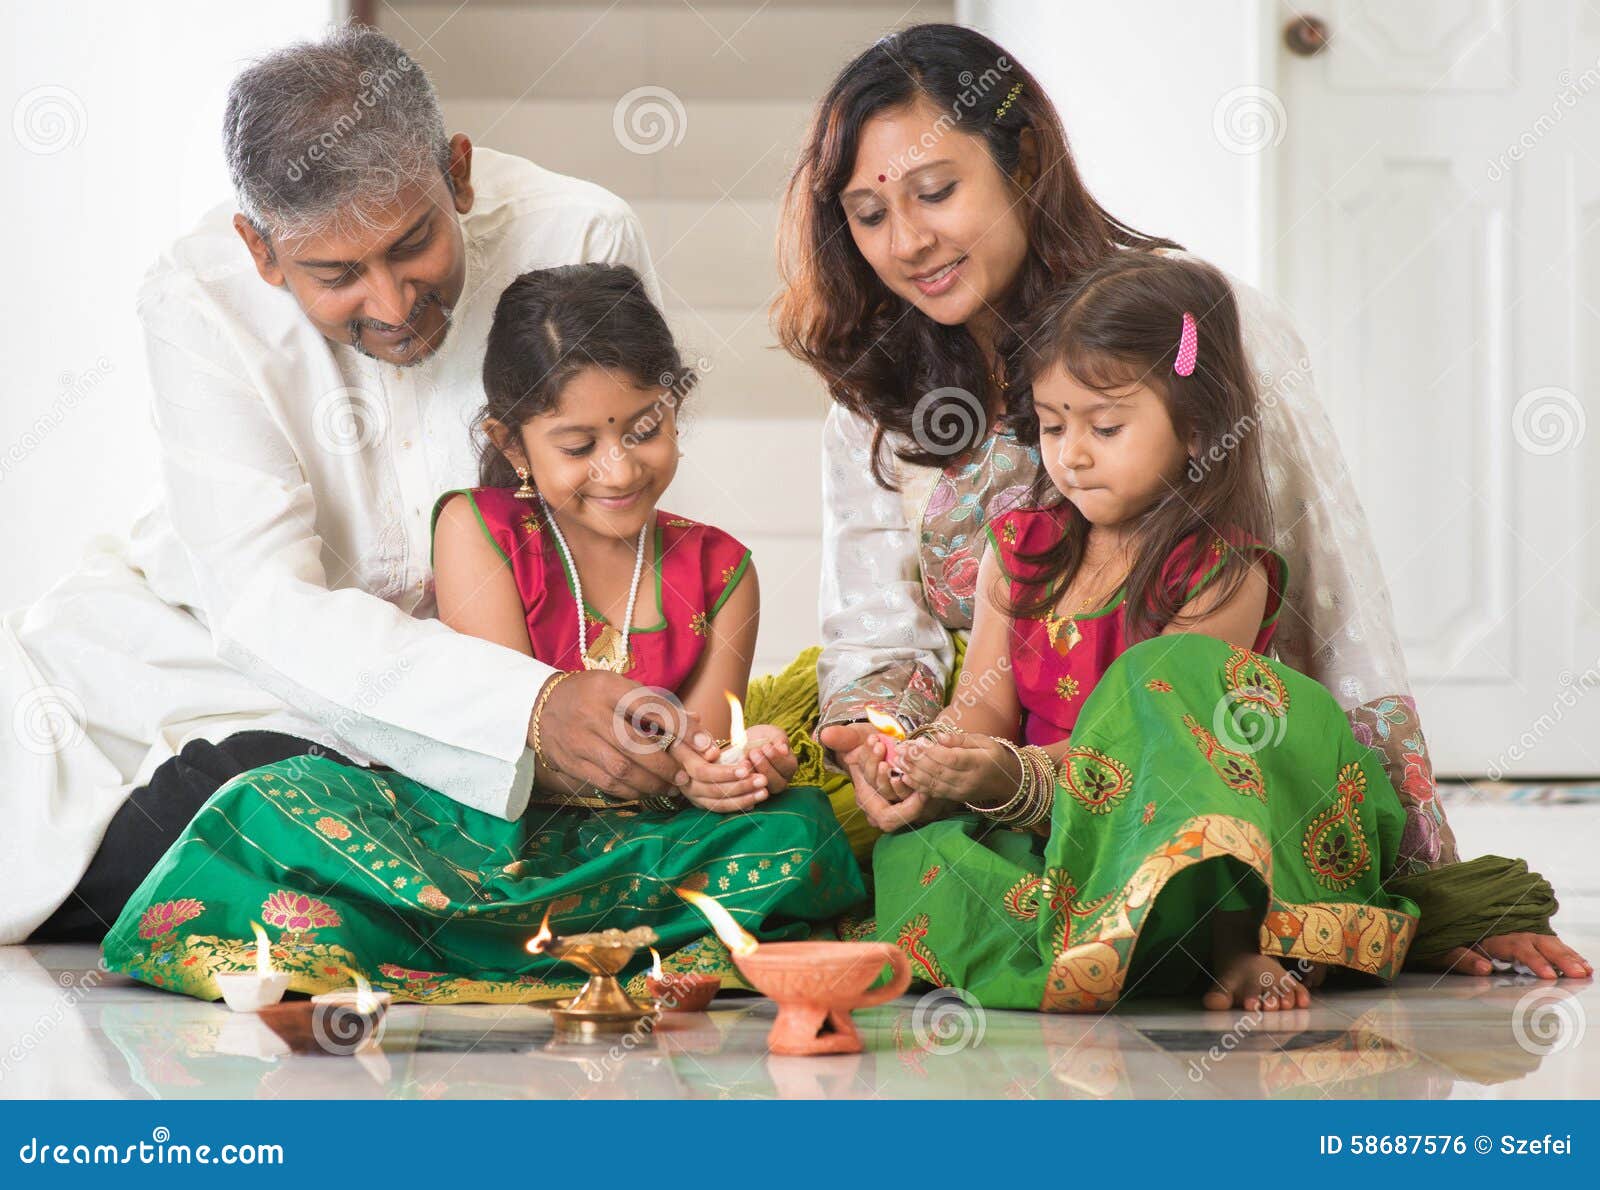 Premium Photo | Indian young family making flower rangoli or arranging  diyas for diwali festival night at porch with gifts and bokeh in the  background